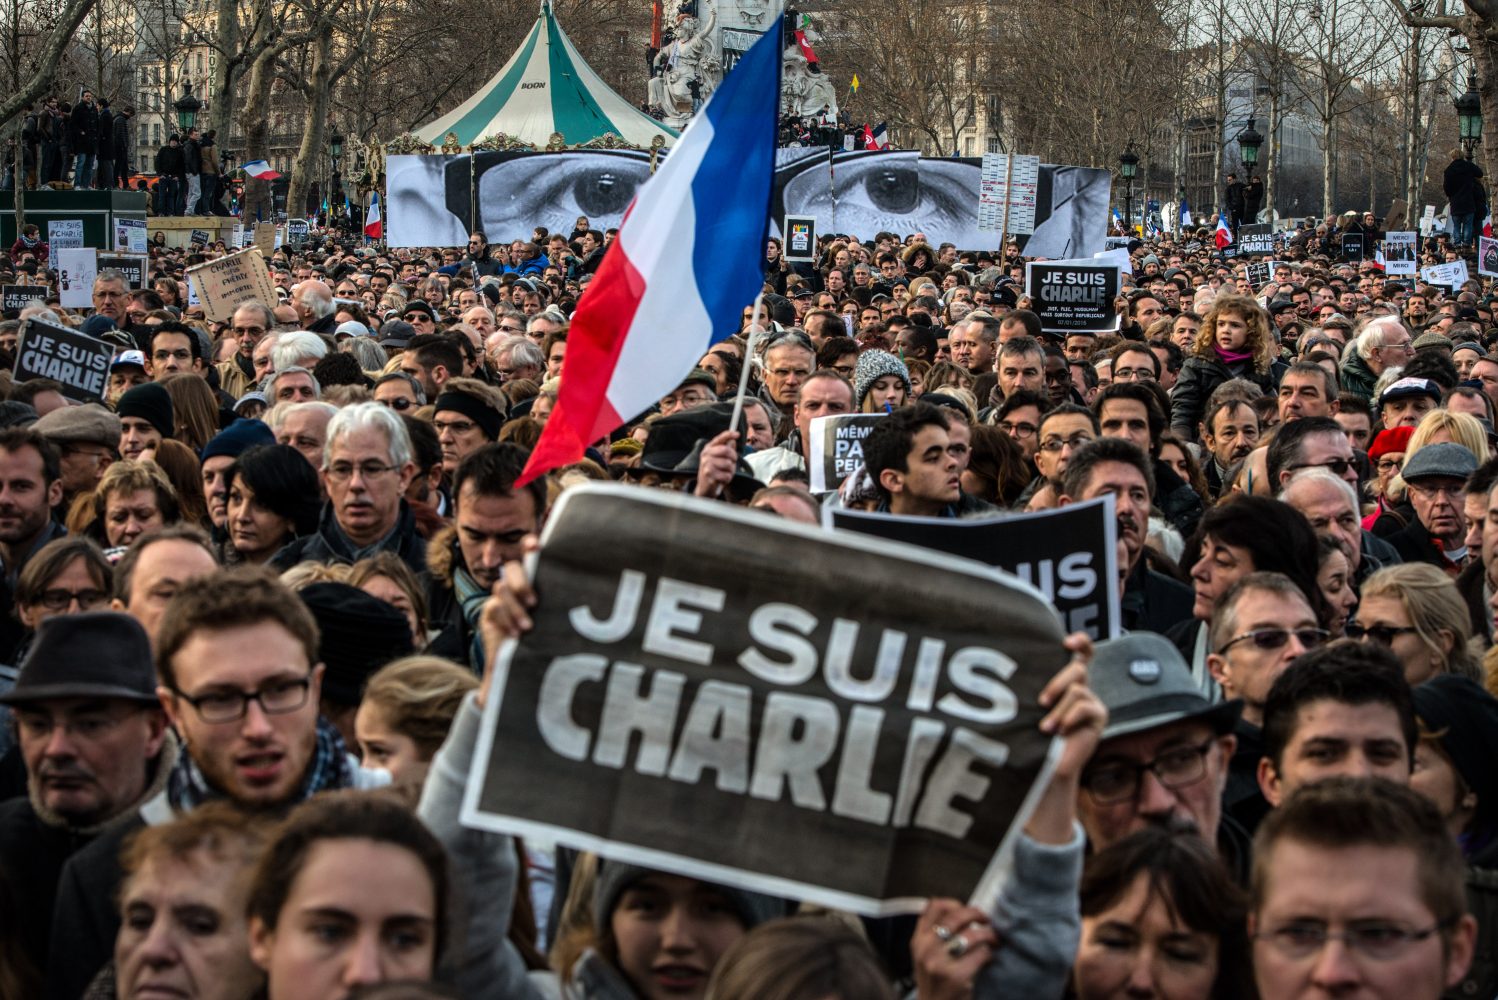 PARIS%2C+FRANCE+-+JANUARY+11%3A++Demonstrators+make+their+way+along+Place+de+la+Republique+during+a+mass+unity+rally+following+the+recent+terrorist+attacks+on+January+11%2C+2015+in+Paris%2C+France.+An+estimated+one+million+people+have+converged+in+central+Paris+for+the+Unity+March+joining+in+solidarity+with+the+17+victims+of+this+weeks+terrorist+attacks+in+the+country.+French+President+Francois+Hollande+led+the+march+and+was+joined+by+world+leaders+in+a+sign+of+unity.+The+terrorist+atrocities+started+on+Wednesday+with+the+attack+on+the+French+satirical+magazine+Charlie+Hebdo%2C+killing+12%2C+and+ended+on+Friday+with+sieges+at+a+printing+company+in+Dammartin+en+Goele+and+a+Kosher+supermarket+in+Paris+with+four+hostages+and+three+suspects+being+killed.+A+fourth+suspect%2C+Hayat+Boumeddiene%2C+26%2C+escaped+and+is+wanted+in+connection+with+the+murder+of+a+policewoman.++%28Photo+by+David+Ramos%2FGetty+Images%29+ORG+XMIT%3A+531669519+ORIG+FILE+ID%3A+461341606